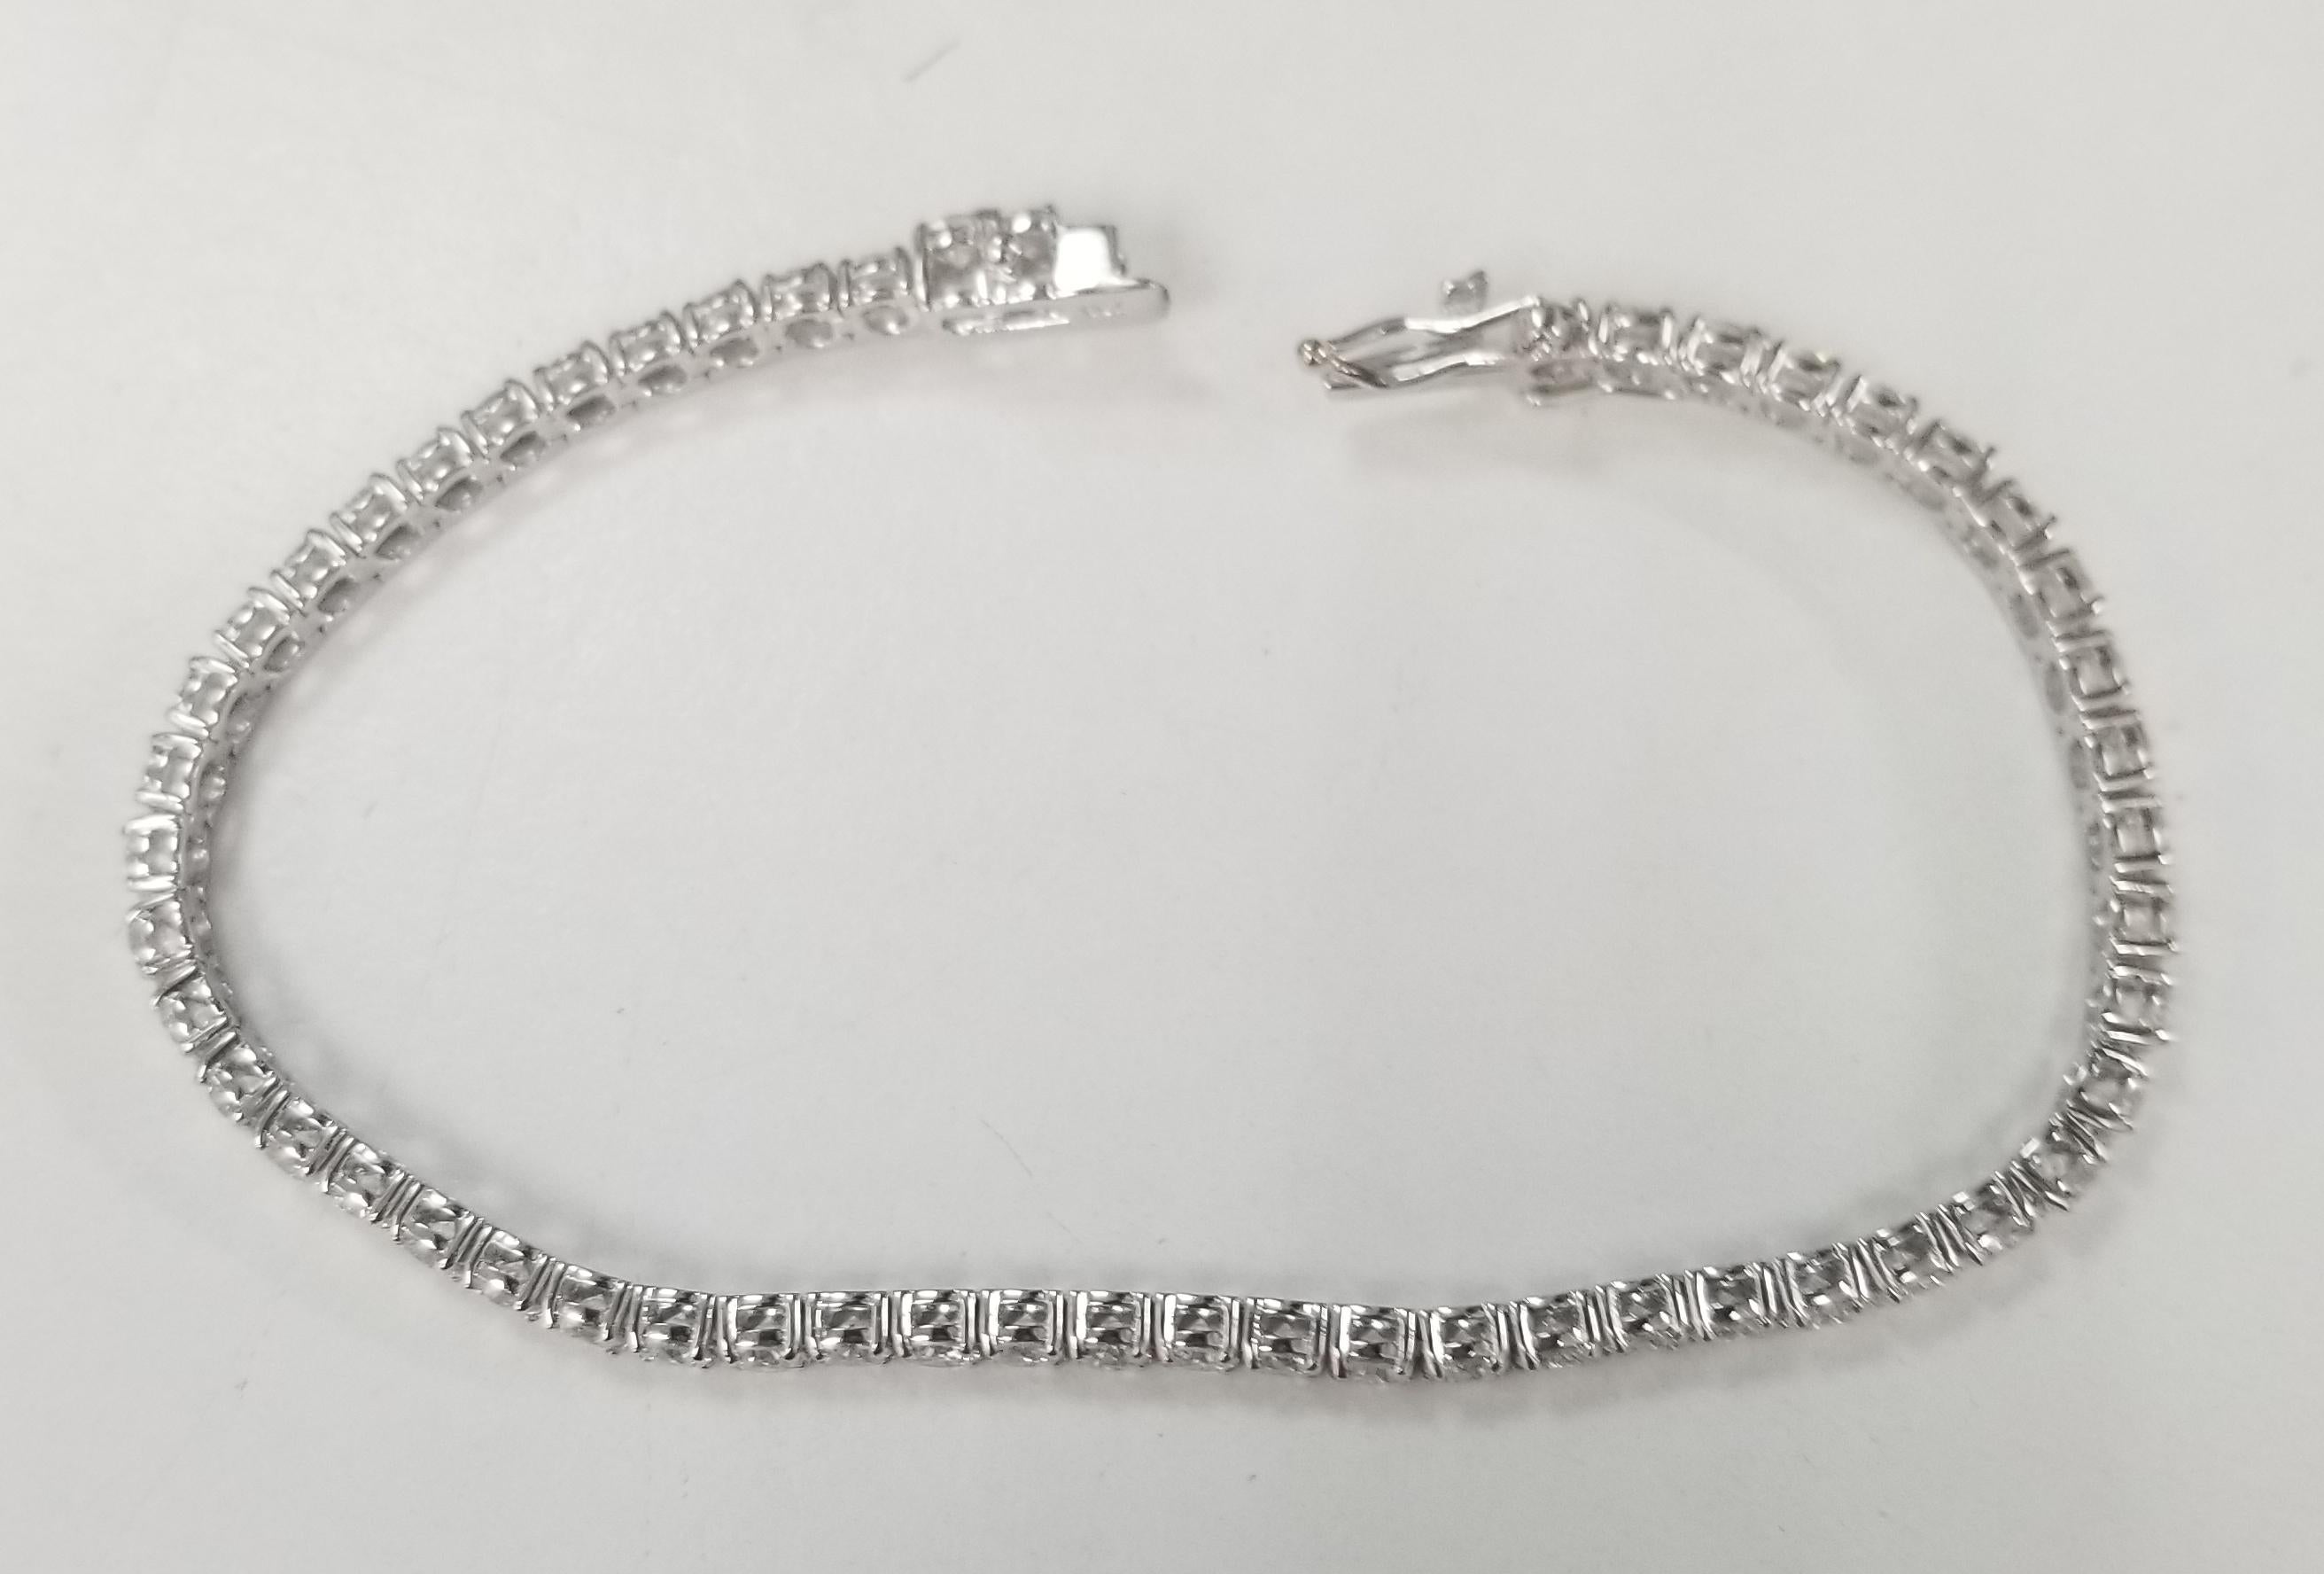 This is very beautiful 18k white gold custom made tennis bracelet with 54 round diamonds color F-G and clarity VS2-SI1 weighing 6.18cts. very fine quality diamonds, bracelet measures 7 inches with clasp and safety.
Specifications:
    main stone: